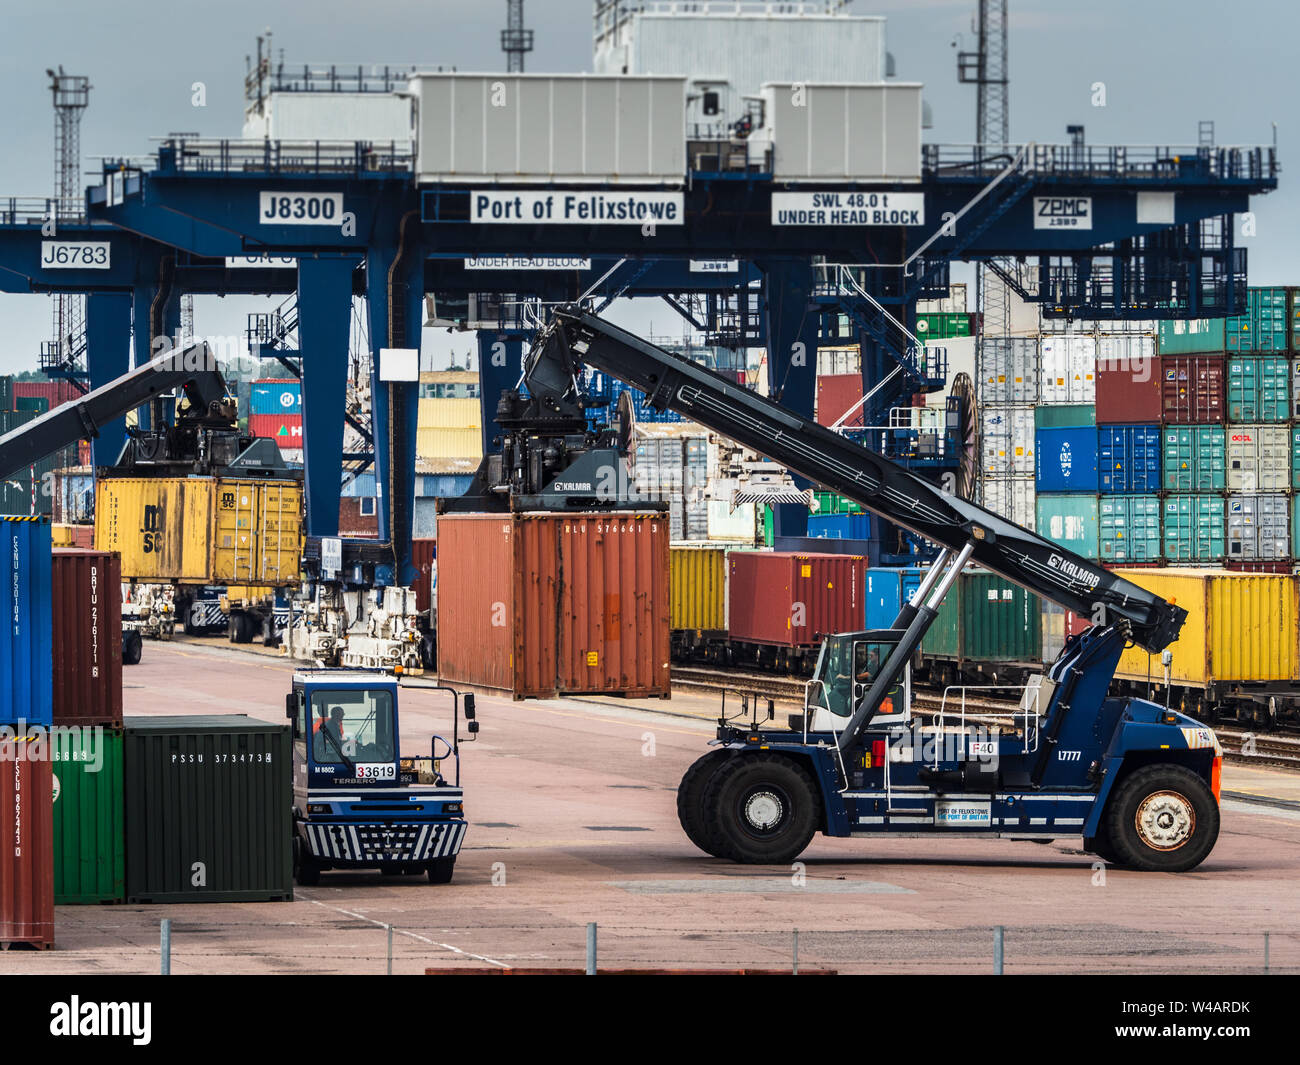 Rail Freight Terminal - Railway Container Freight Handling at the Port of Felixstowe. Containers are loaded onto container trains for onward transit. Stock Photo